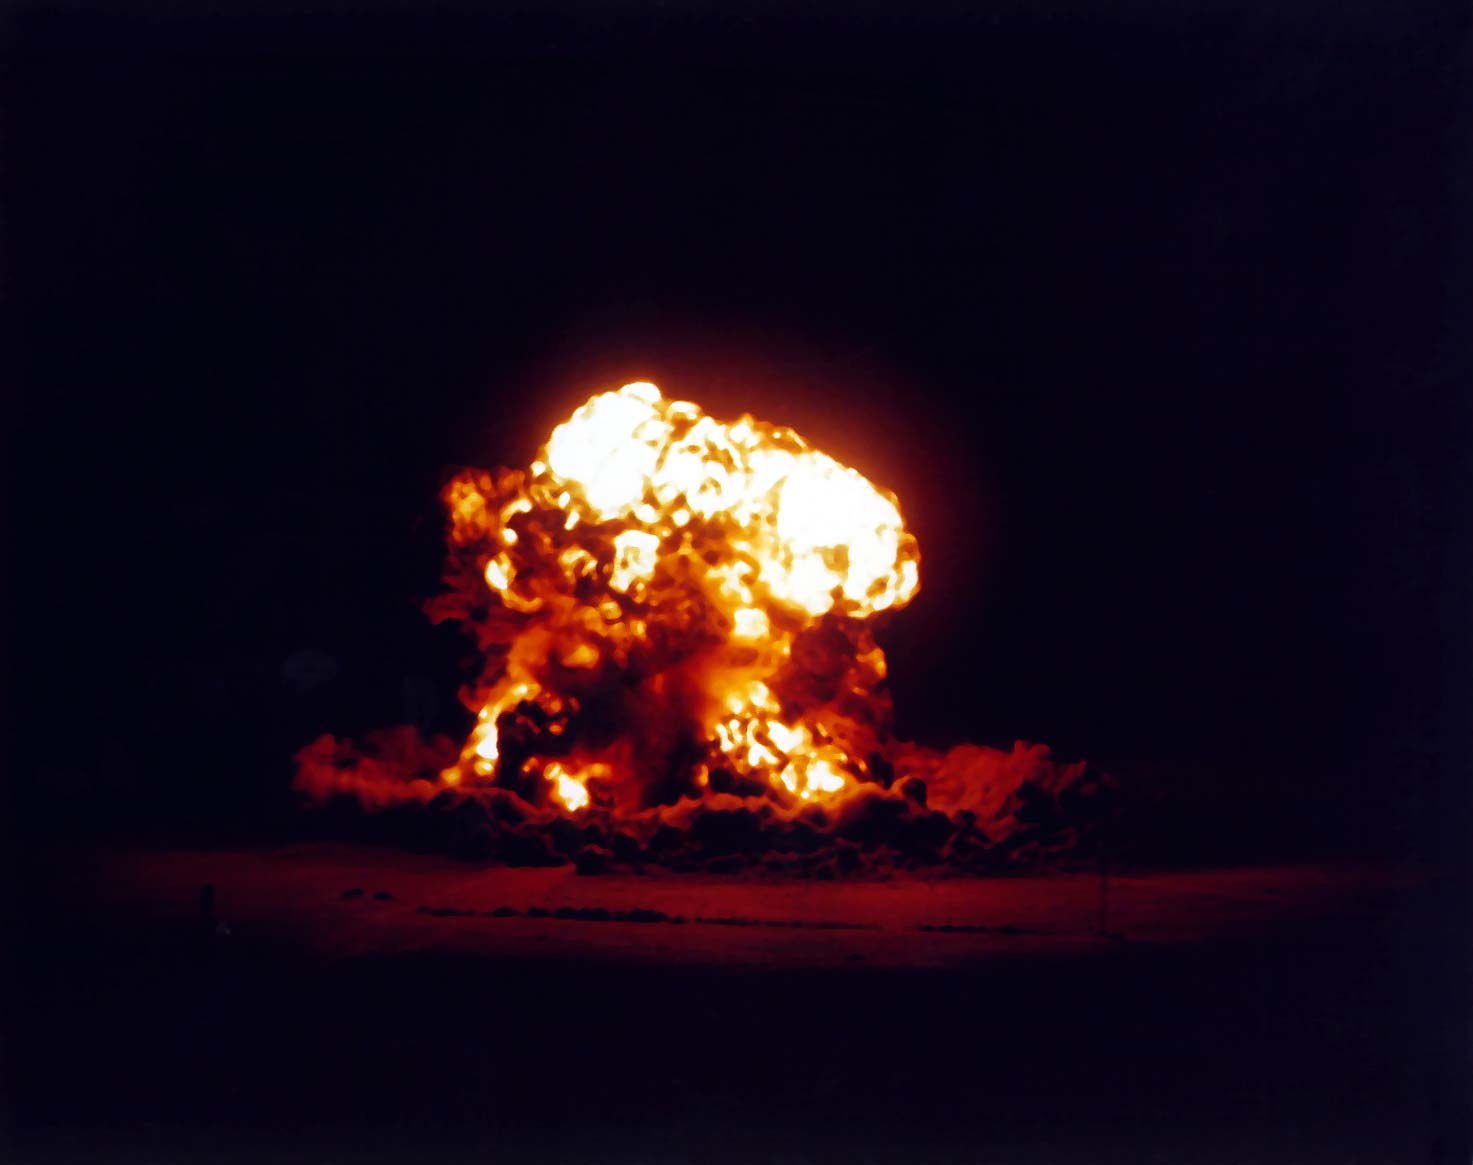 DIABLO
DIABLO was fired on July 15, 1957 at the Nevada Test Site from a 500 foot tower. It had a yield of 17 kilotons.

This was part of Operation Plumbob, number 94. 
Keywords: Nevada Test Site, Mercury, Nye County, Nevada NTS